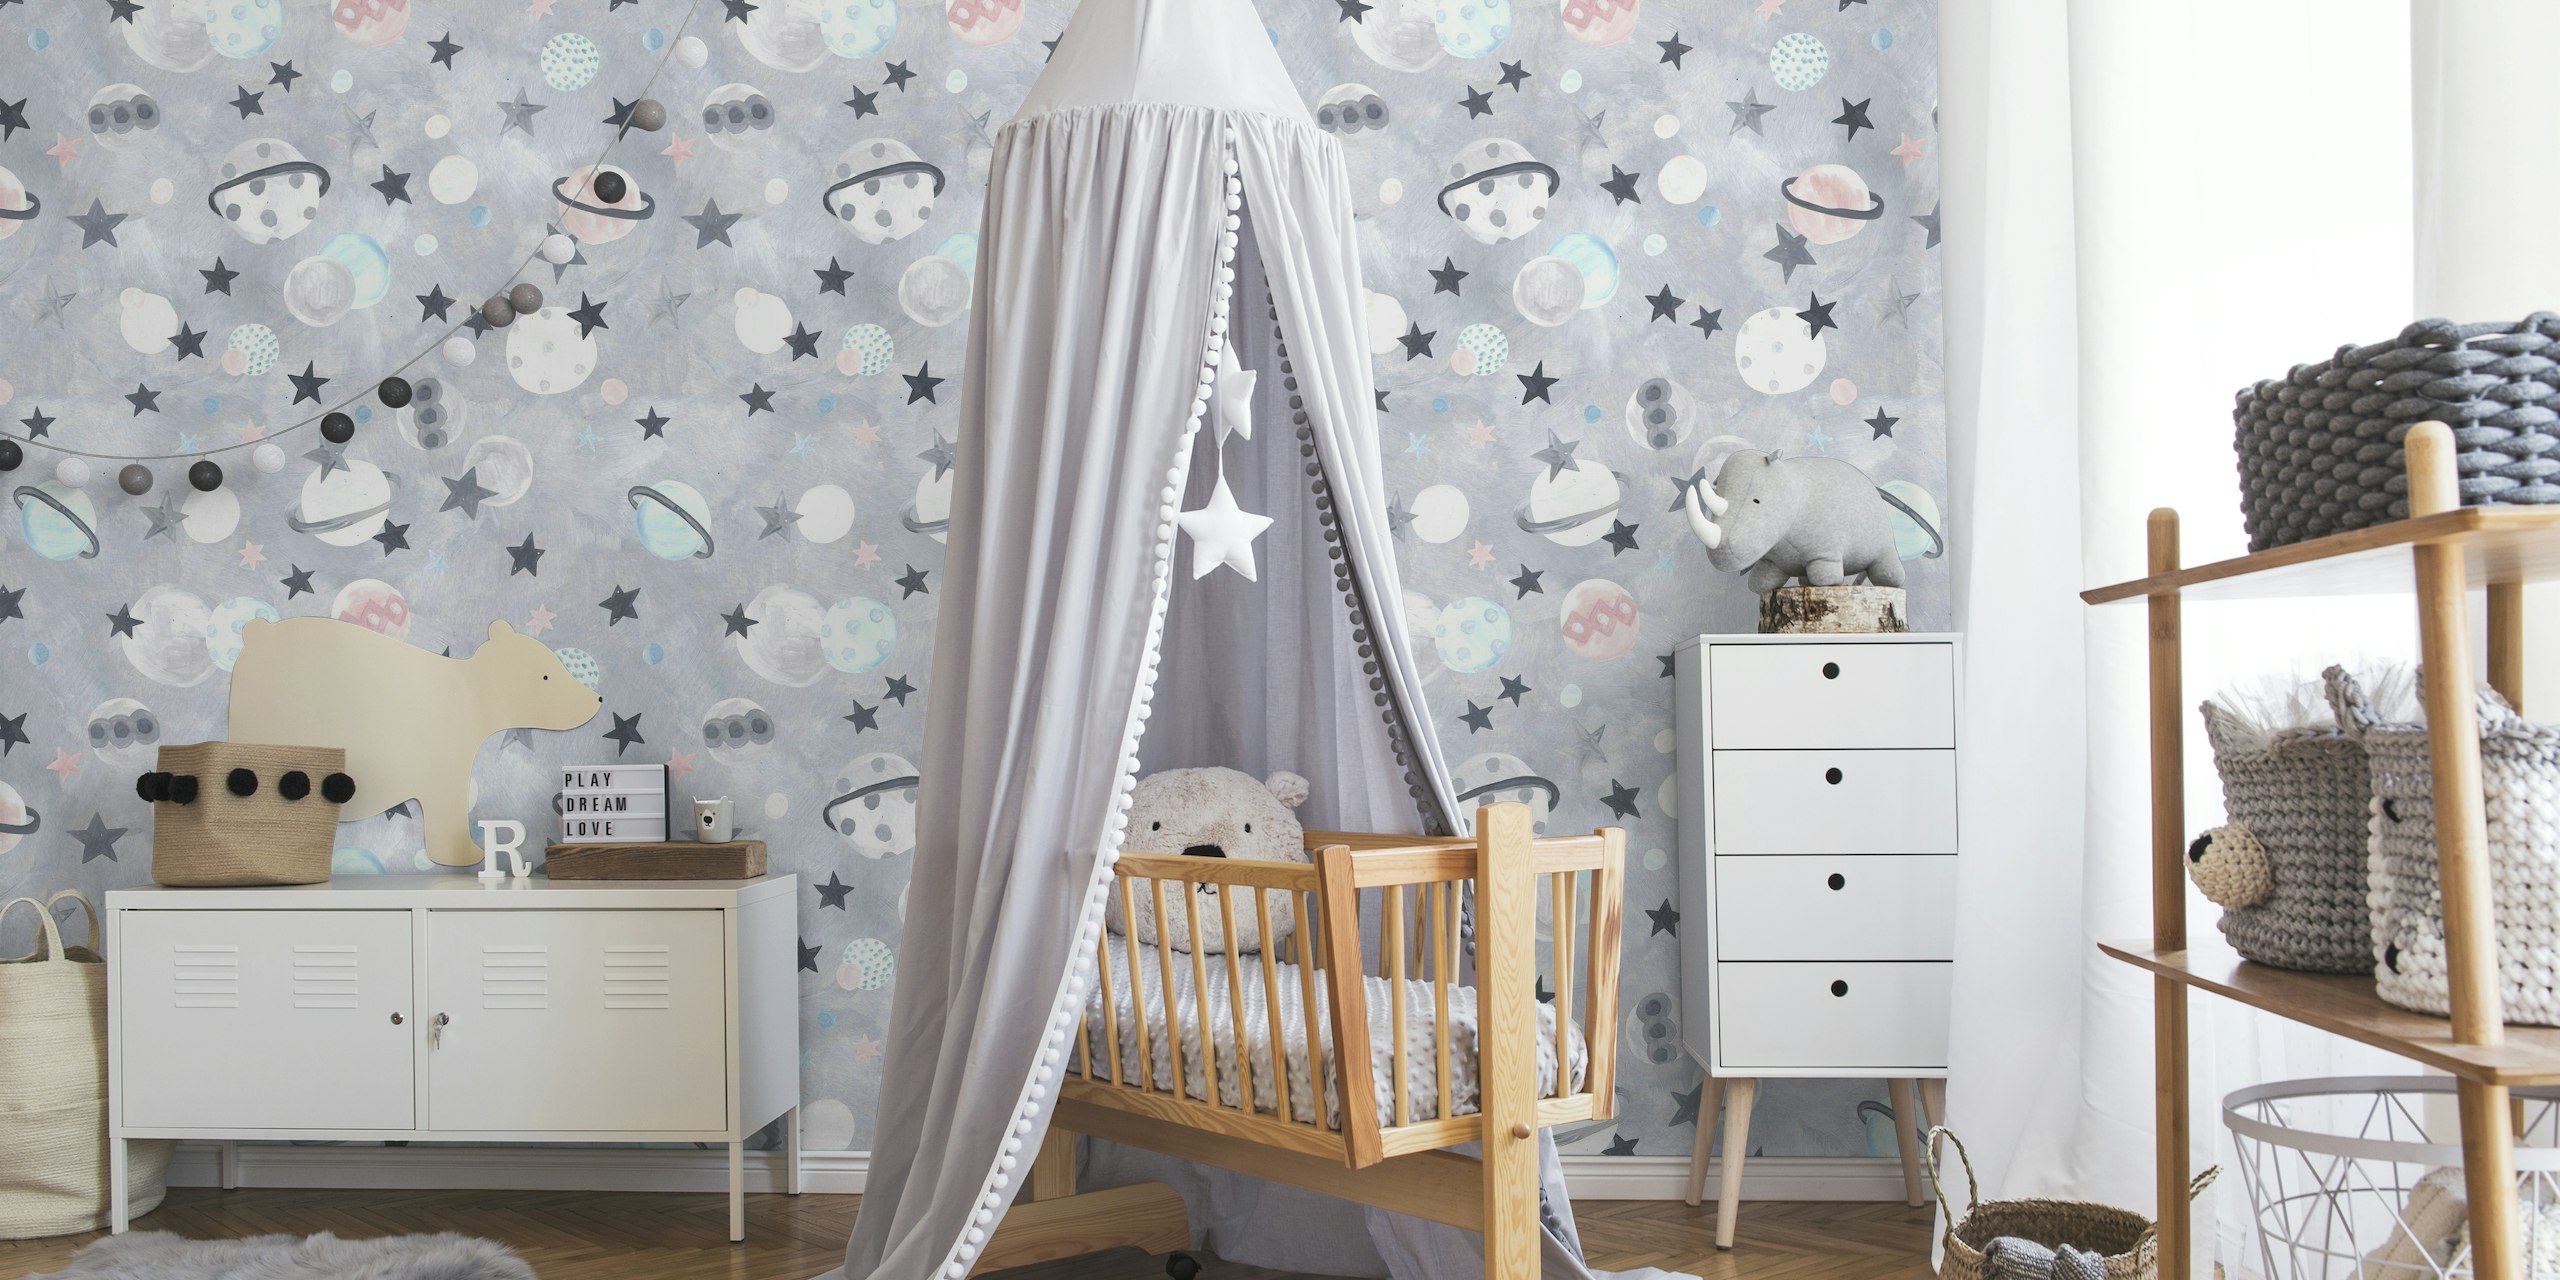 Planets and Stars wall mural with celestial bodies and ethereal constellations on a dreamy backdrop